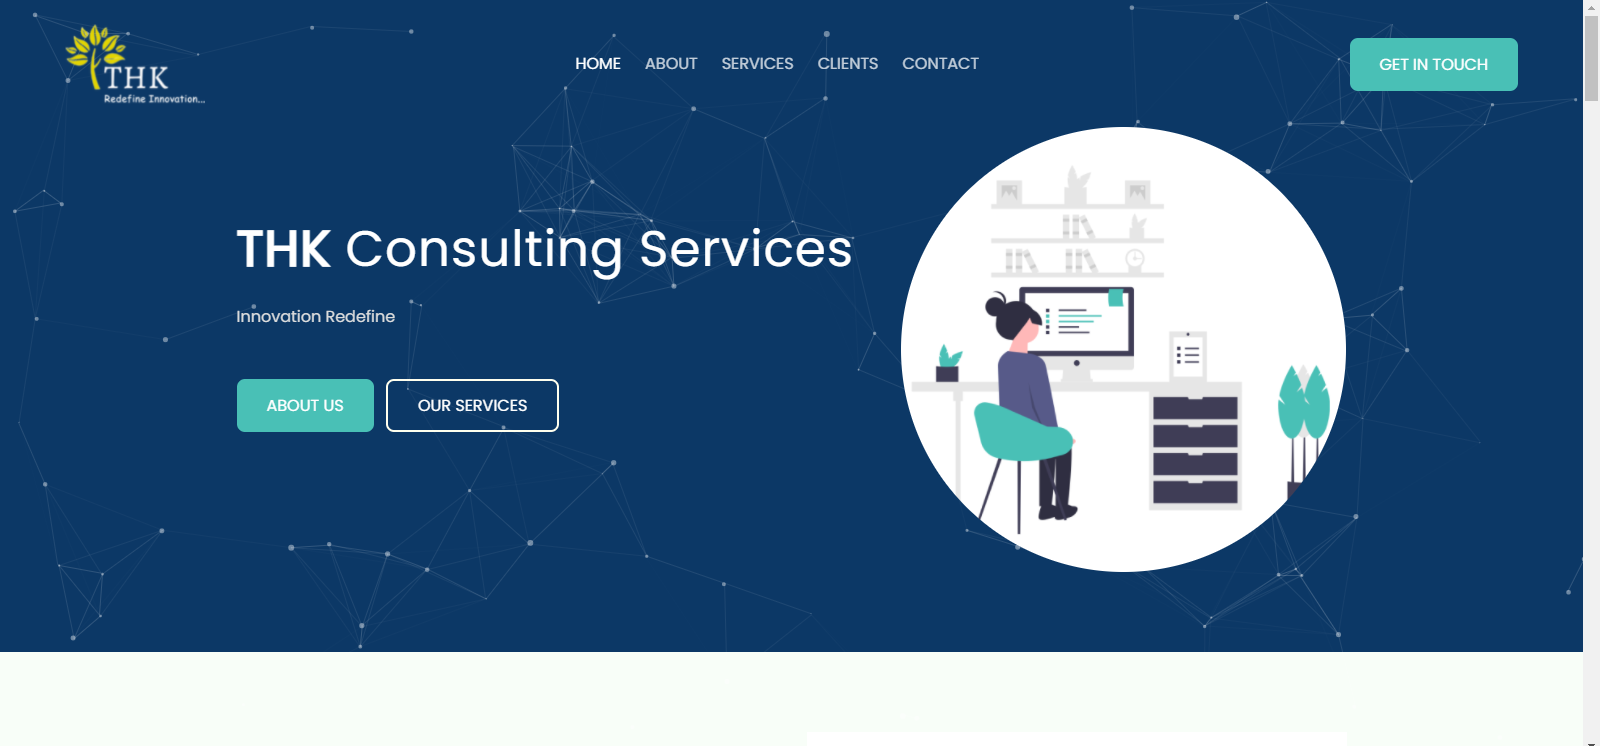 THK Consulting Services